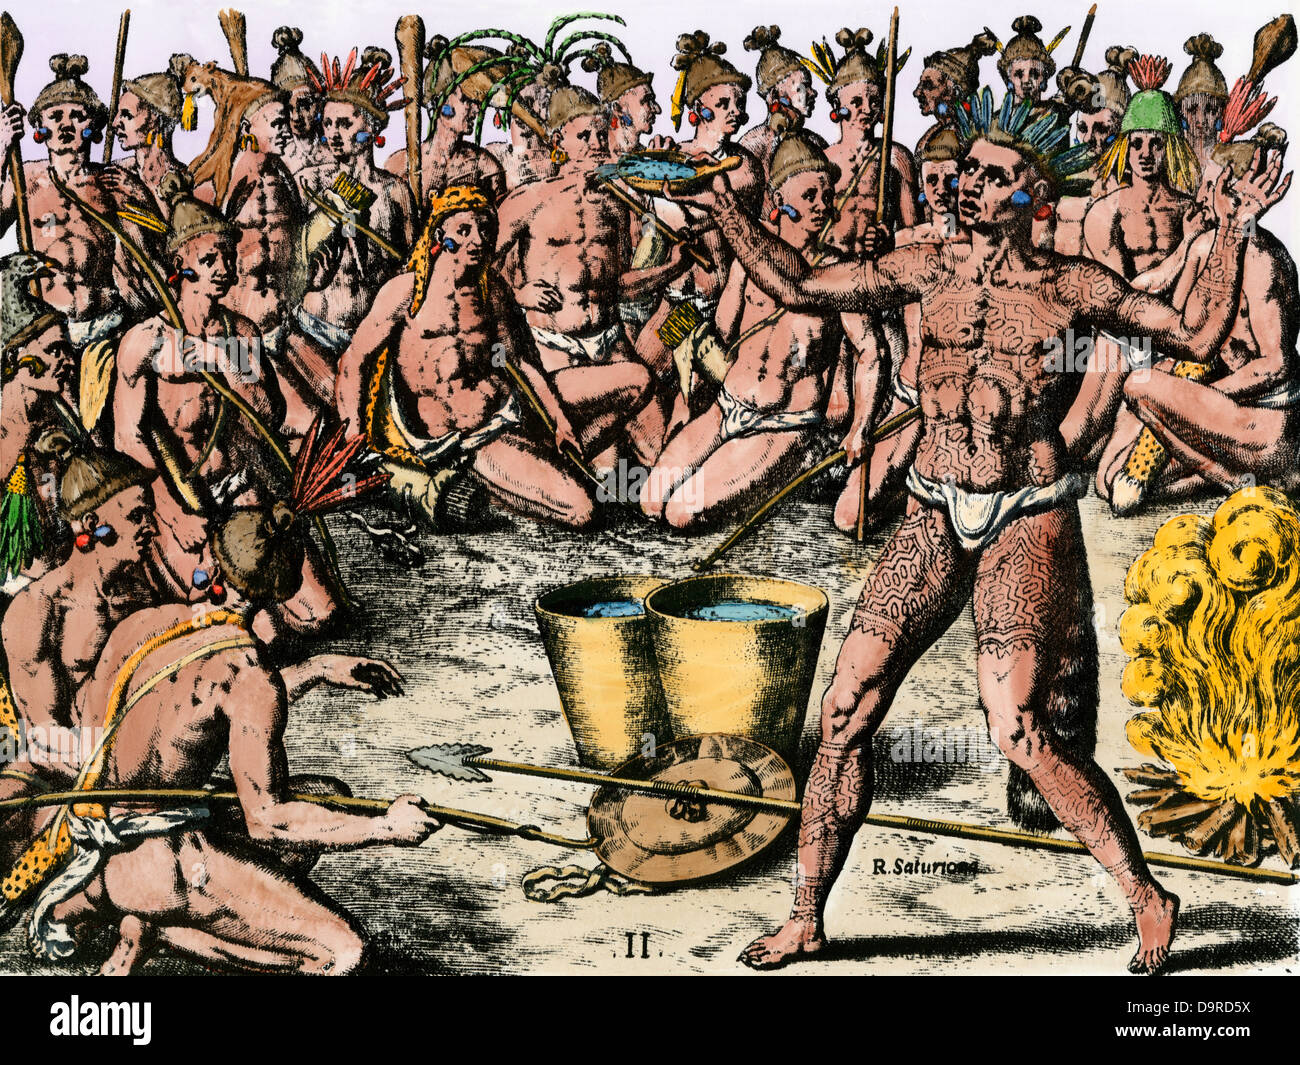 Timucua chief's ceremony before battle with neighboring tribes, Florida, 1500s. Hand-colored woodcut of DeBry engraving of a LeMoyne painting Stock Photo